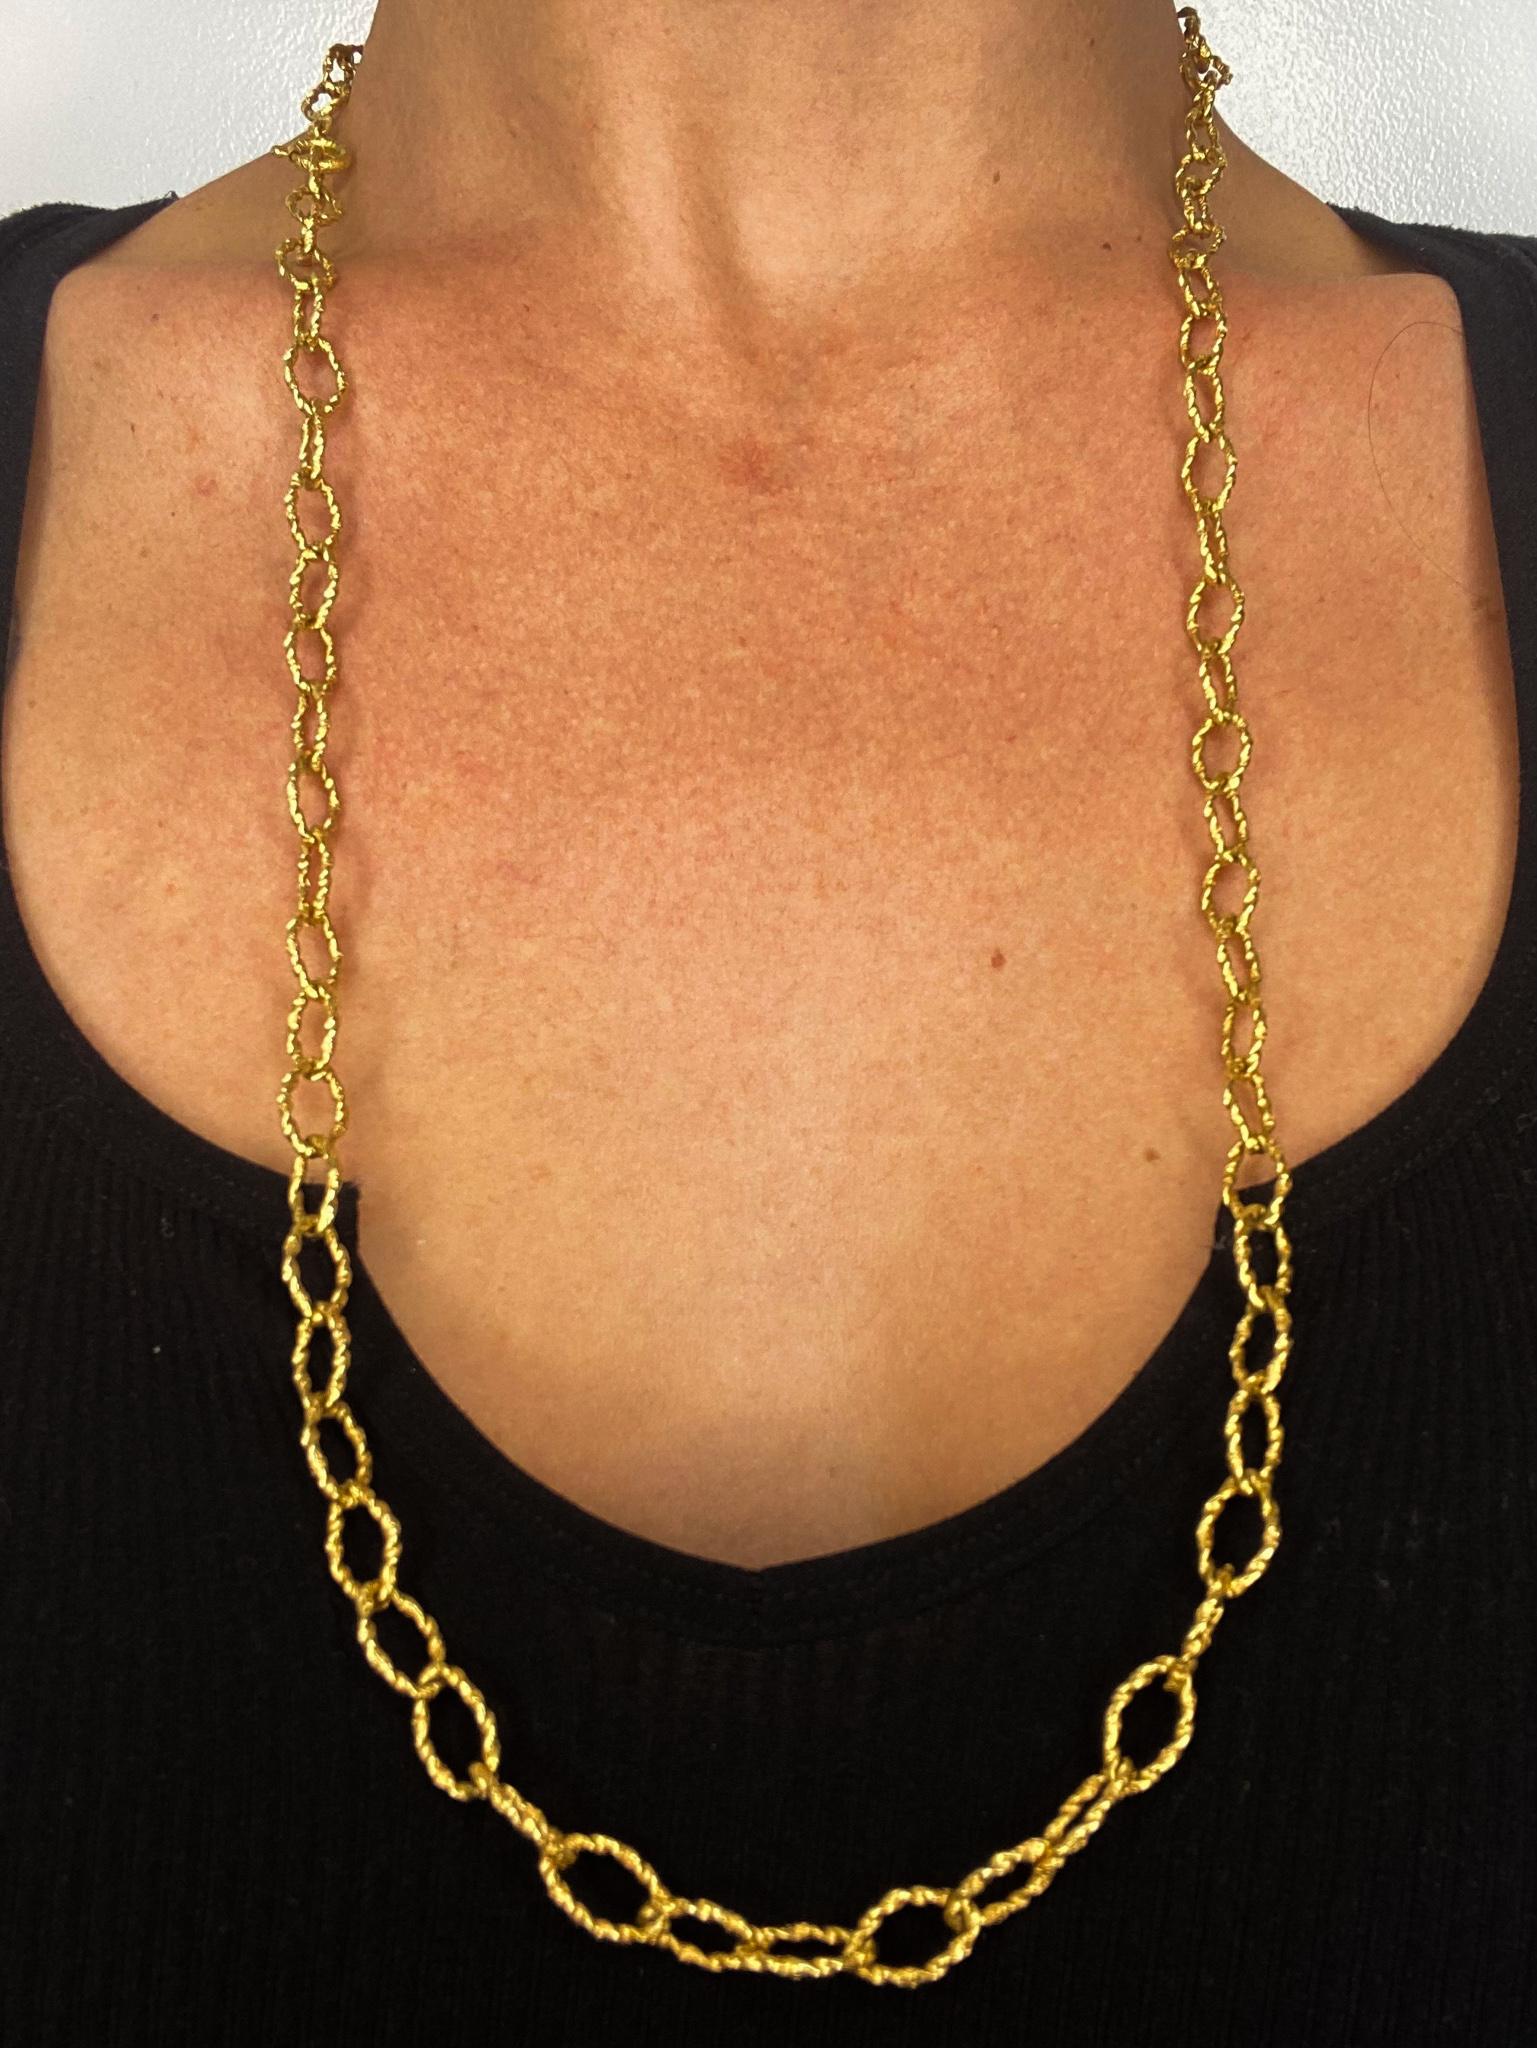 Italian Retro 1970 Modernist Long Chain with Textured Links in 18Kt Yellow Gold 4